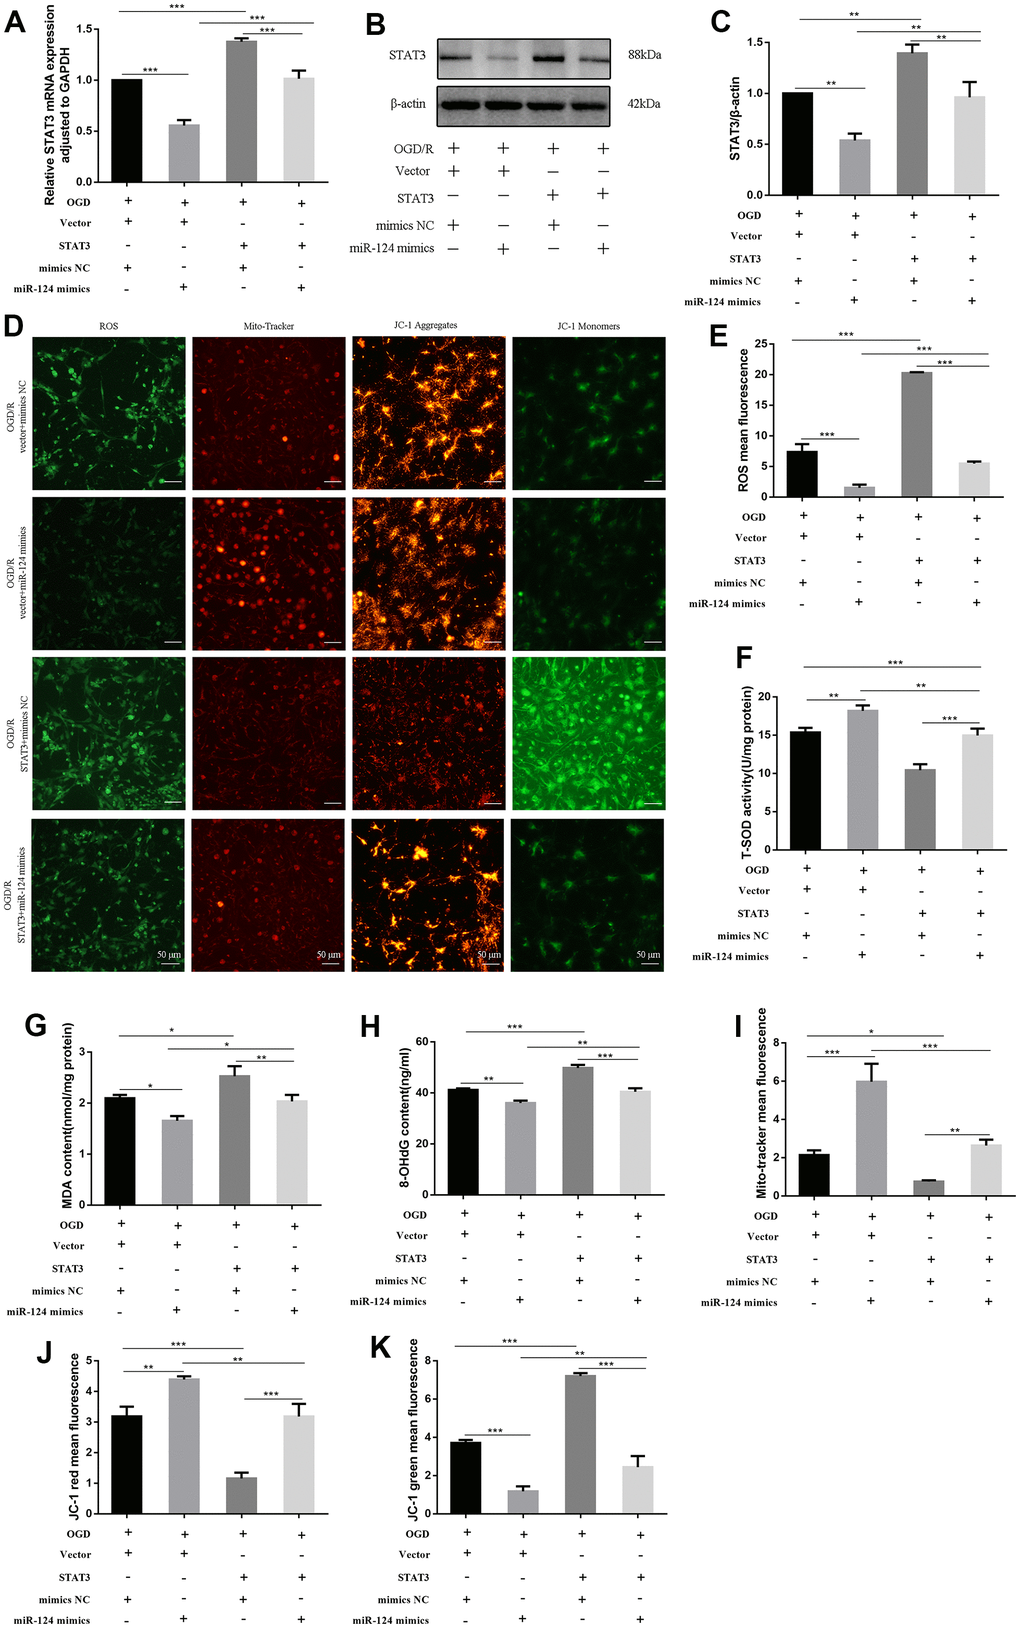 STAT3 overexpression promotes oxidative stress in OGD-treated neurons. The neurons were transfected with vector, STAT3(ORF), or co-transfected with vector and mimics NC, or co-transfected with vector and miR-124 mimics, or co-transfected with STAT3(ORF) and mimics NC, or co-transfected with STAT3(ORF) and miR-124 mimics. (A) The STAT3 mRNA was detected by qRT-PCR; (B) The protein levels of STAT3 were detected by Western blot; (C) Quantitative analysis of the protein levels of STAT3; (D) Intracellular ROS was measured using DCFH-DA with a fluorescence microscope; Representative photomicrograph of mito-tracker red; Representative photomicrographs of fluorescence shift from red to green of JC-1 staining. Scale bar, 50μm; (E) Quantitative analysis green fluorescence of ROS; (F) The SOD activity was determined by the commercial kits; (G) The content of MDA was determined by the commercial kits; (H) The content of 8-OHdG was determined by the commercial kits; (I) Quantitative analysis of mito-tracker red; (J, K) Quantitative analysis of fluorescence shift from red to green of JC-1 staining; Data were expressed as mean ± SD (derived from three independent experiments for each sample). NS, not significant for p > 0.05, * p p p 